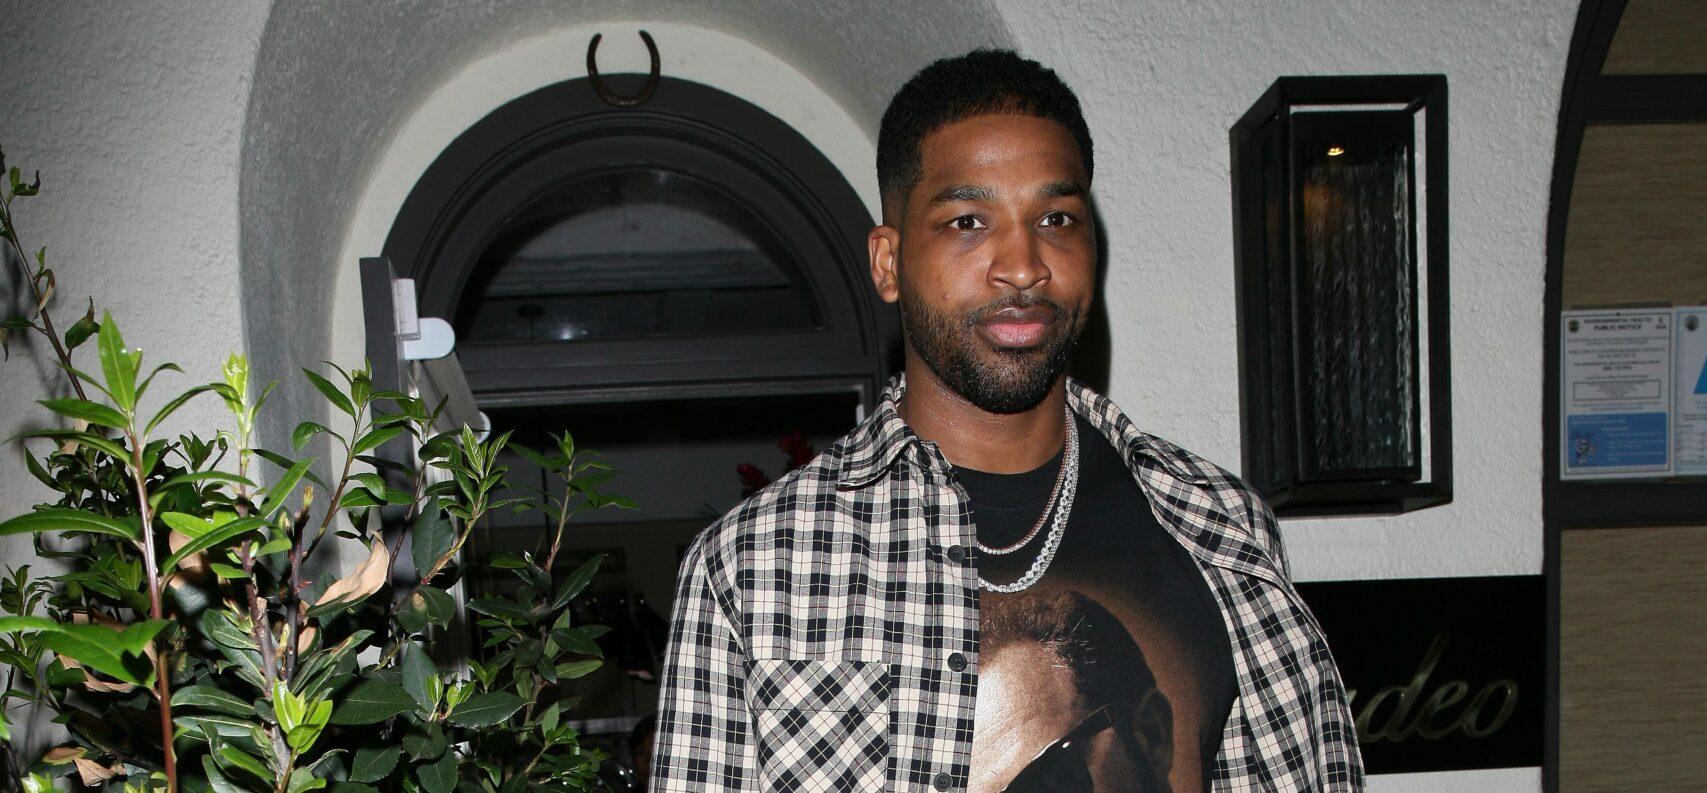 Maralee Nichols Wants To ‘Defend My Character’ Amid Tristan Thompson Paternity Scandal